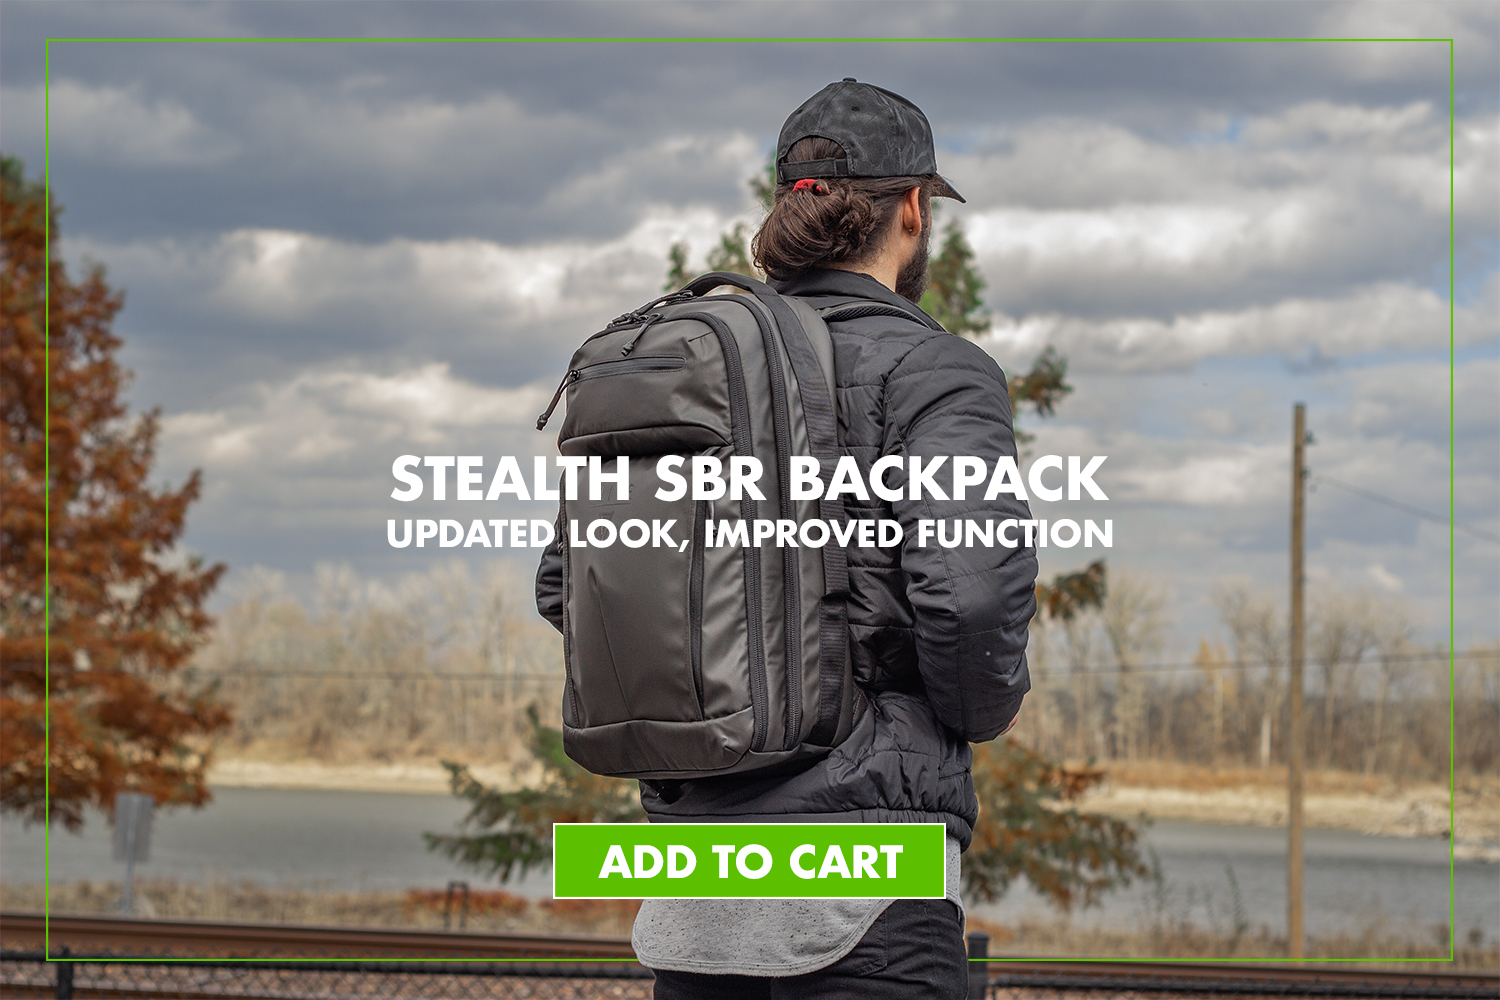 Elite Survival Stealth SBR Backpack - The perfect pack for transporting your SBR